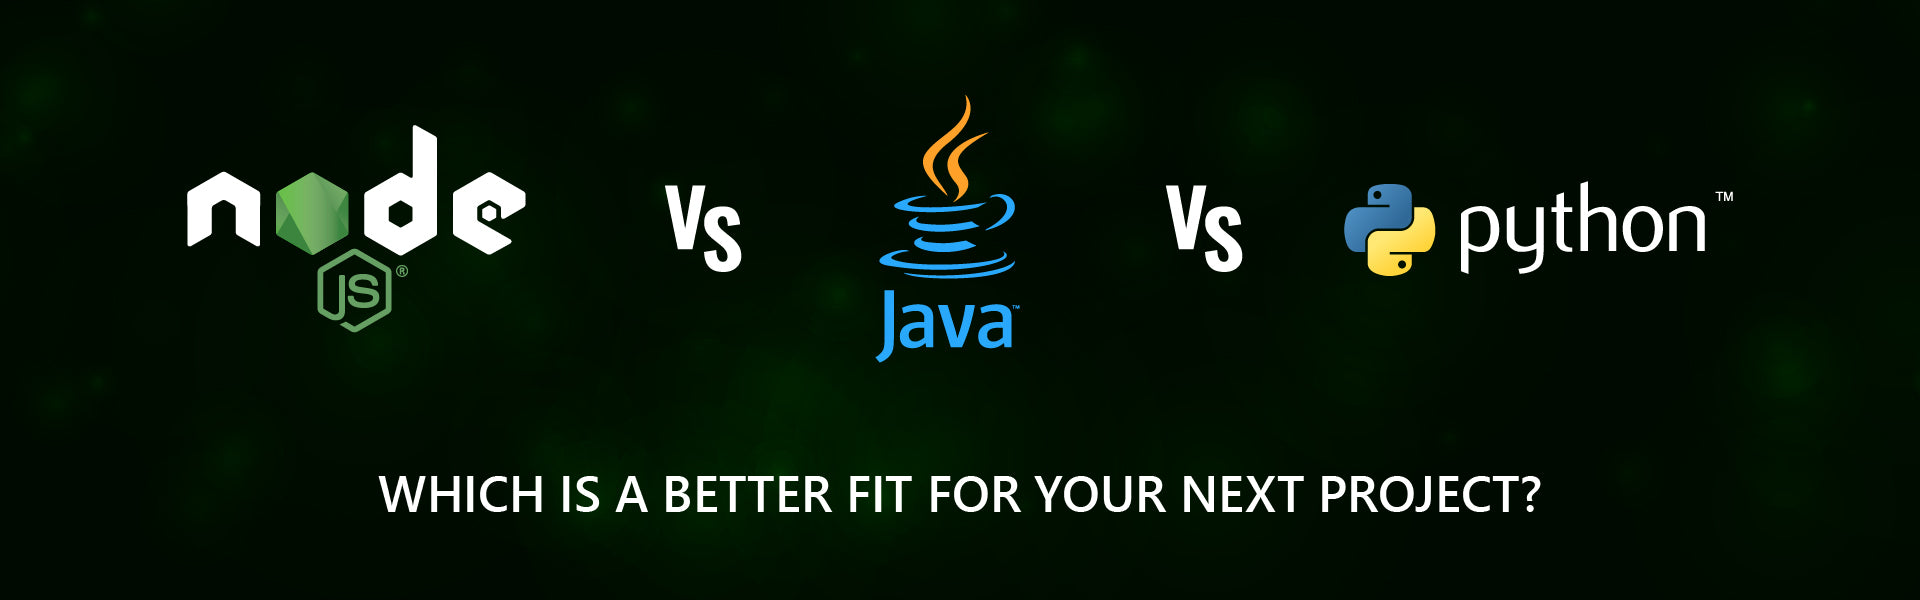 Node JS vs Java vs Python - Which is a better fit for your next project?